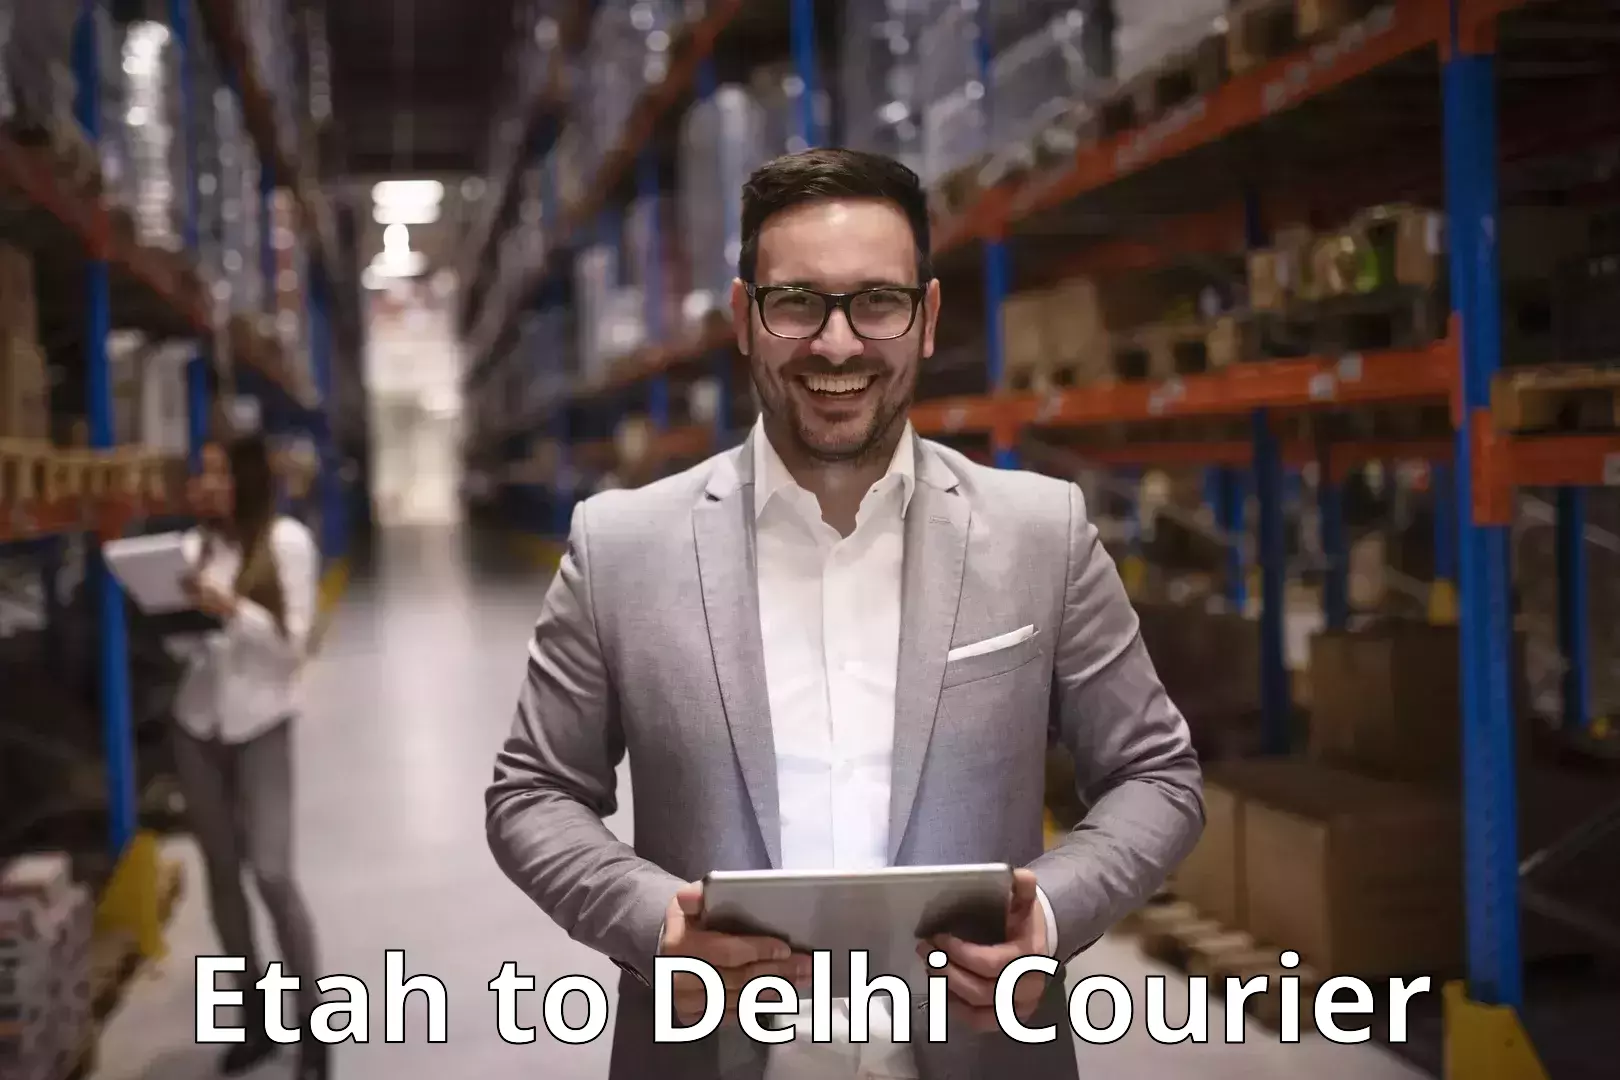 On-call courier service Etah to NCR